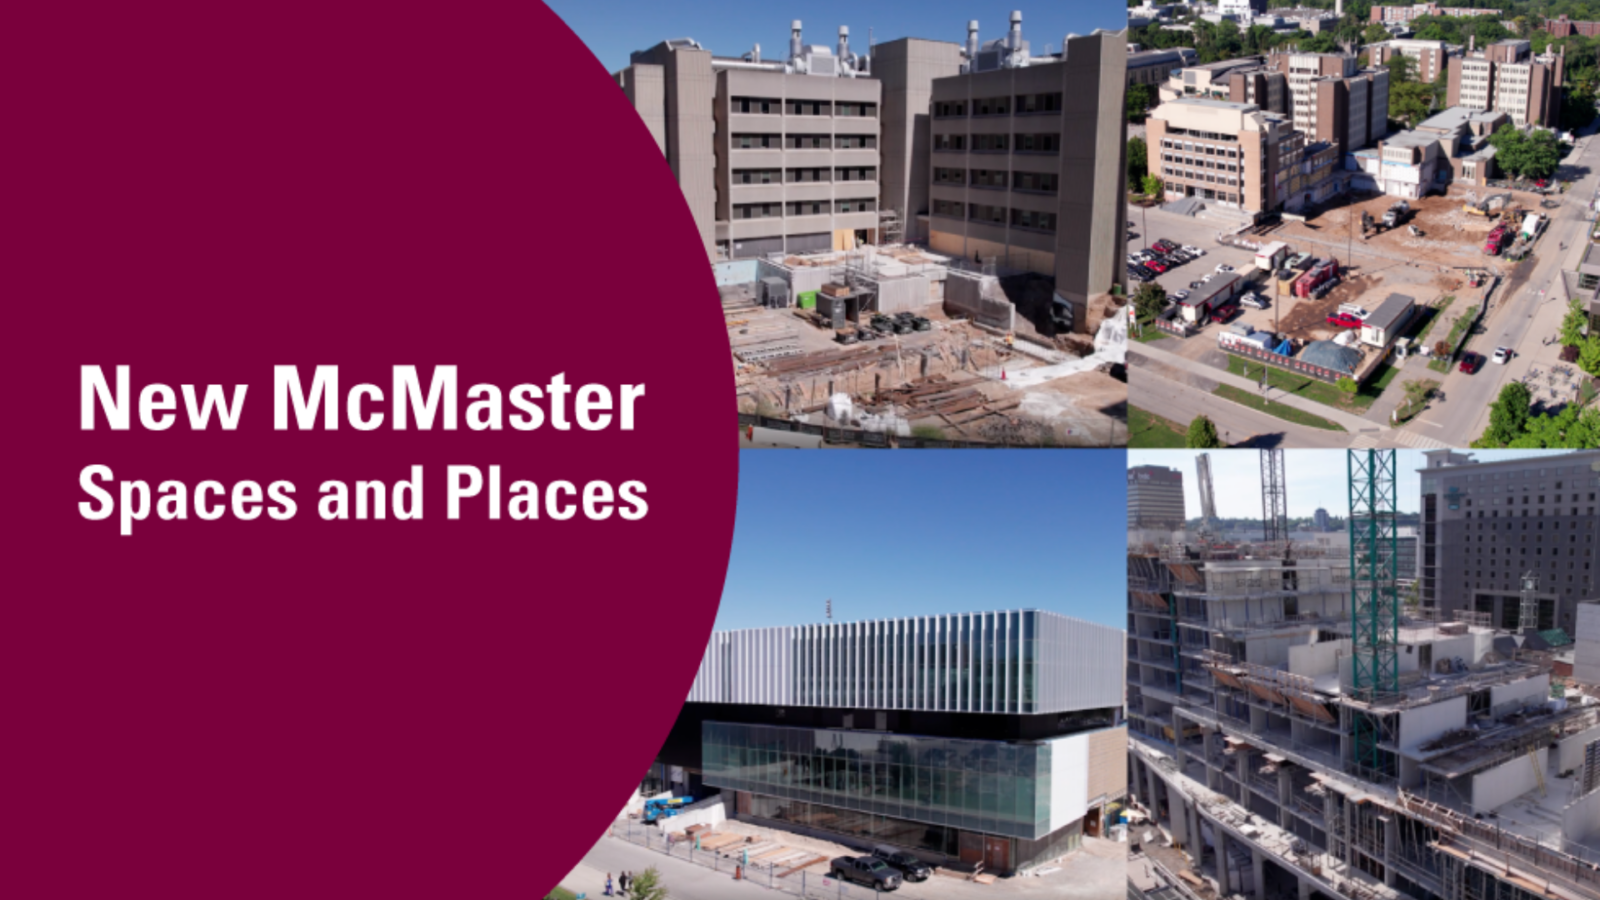 New McMaster Spaces and Places